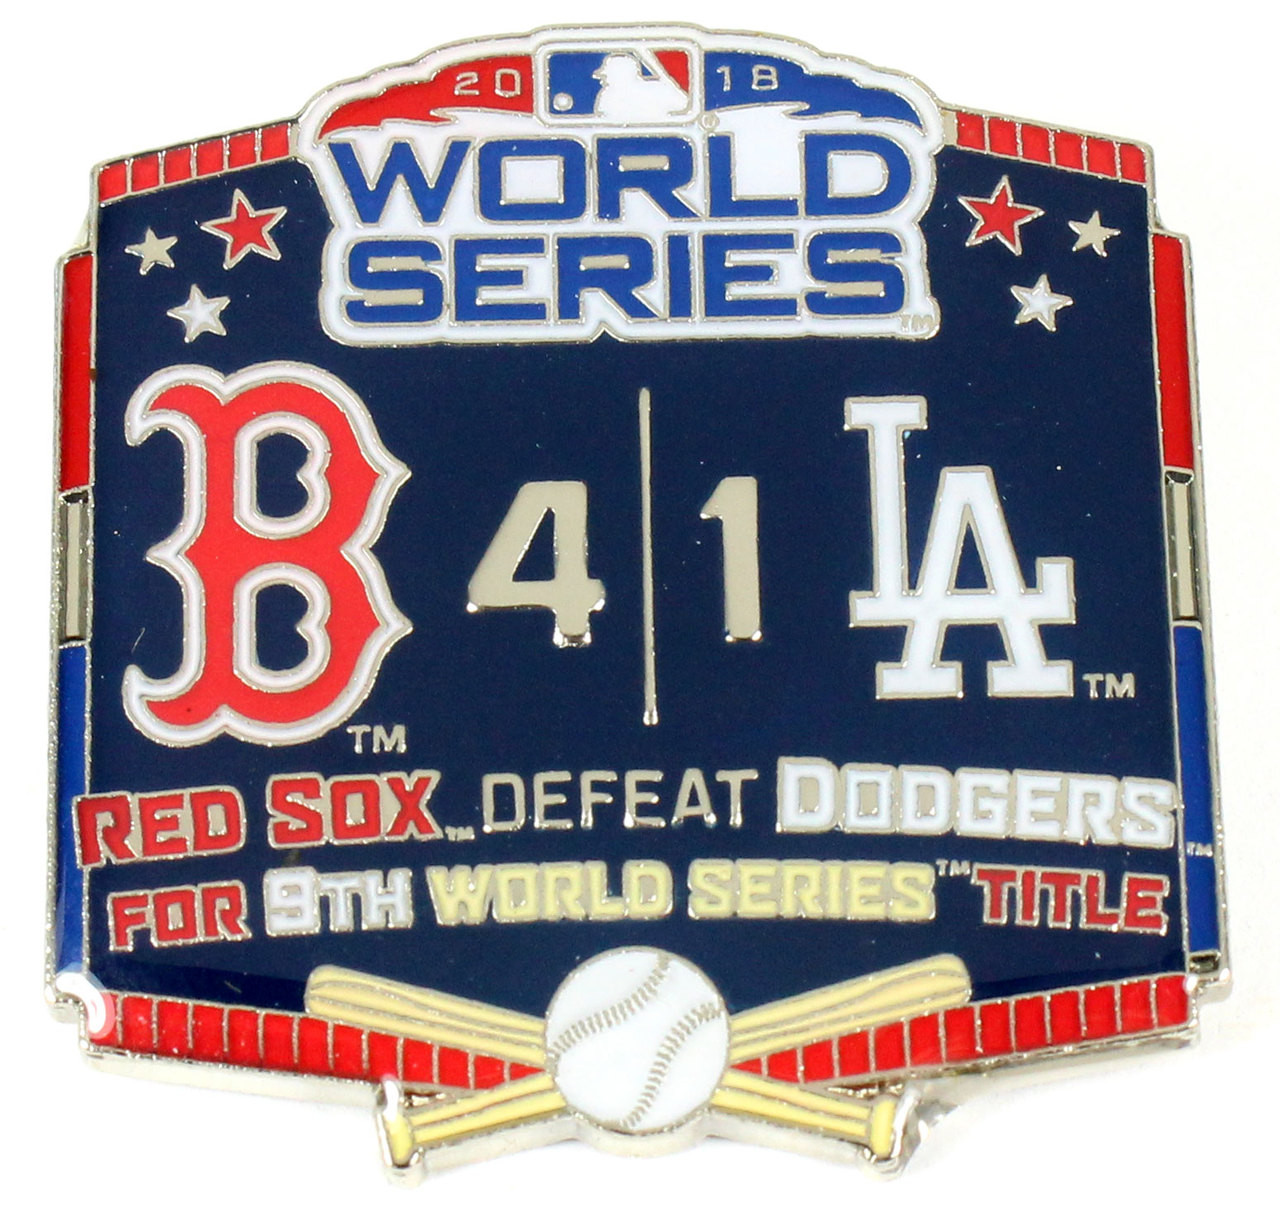 DODGERS: The Official World Series Championship Commemorative Book